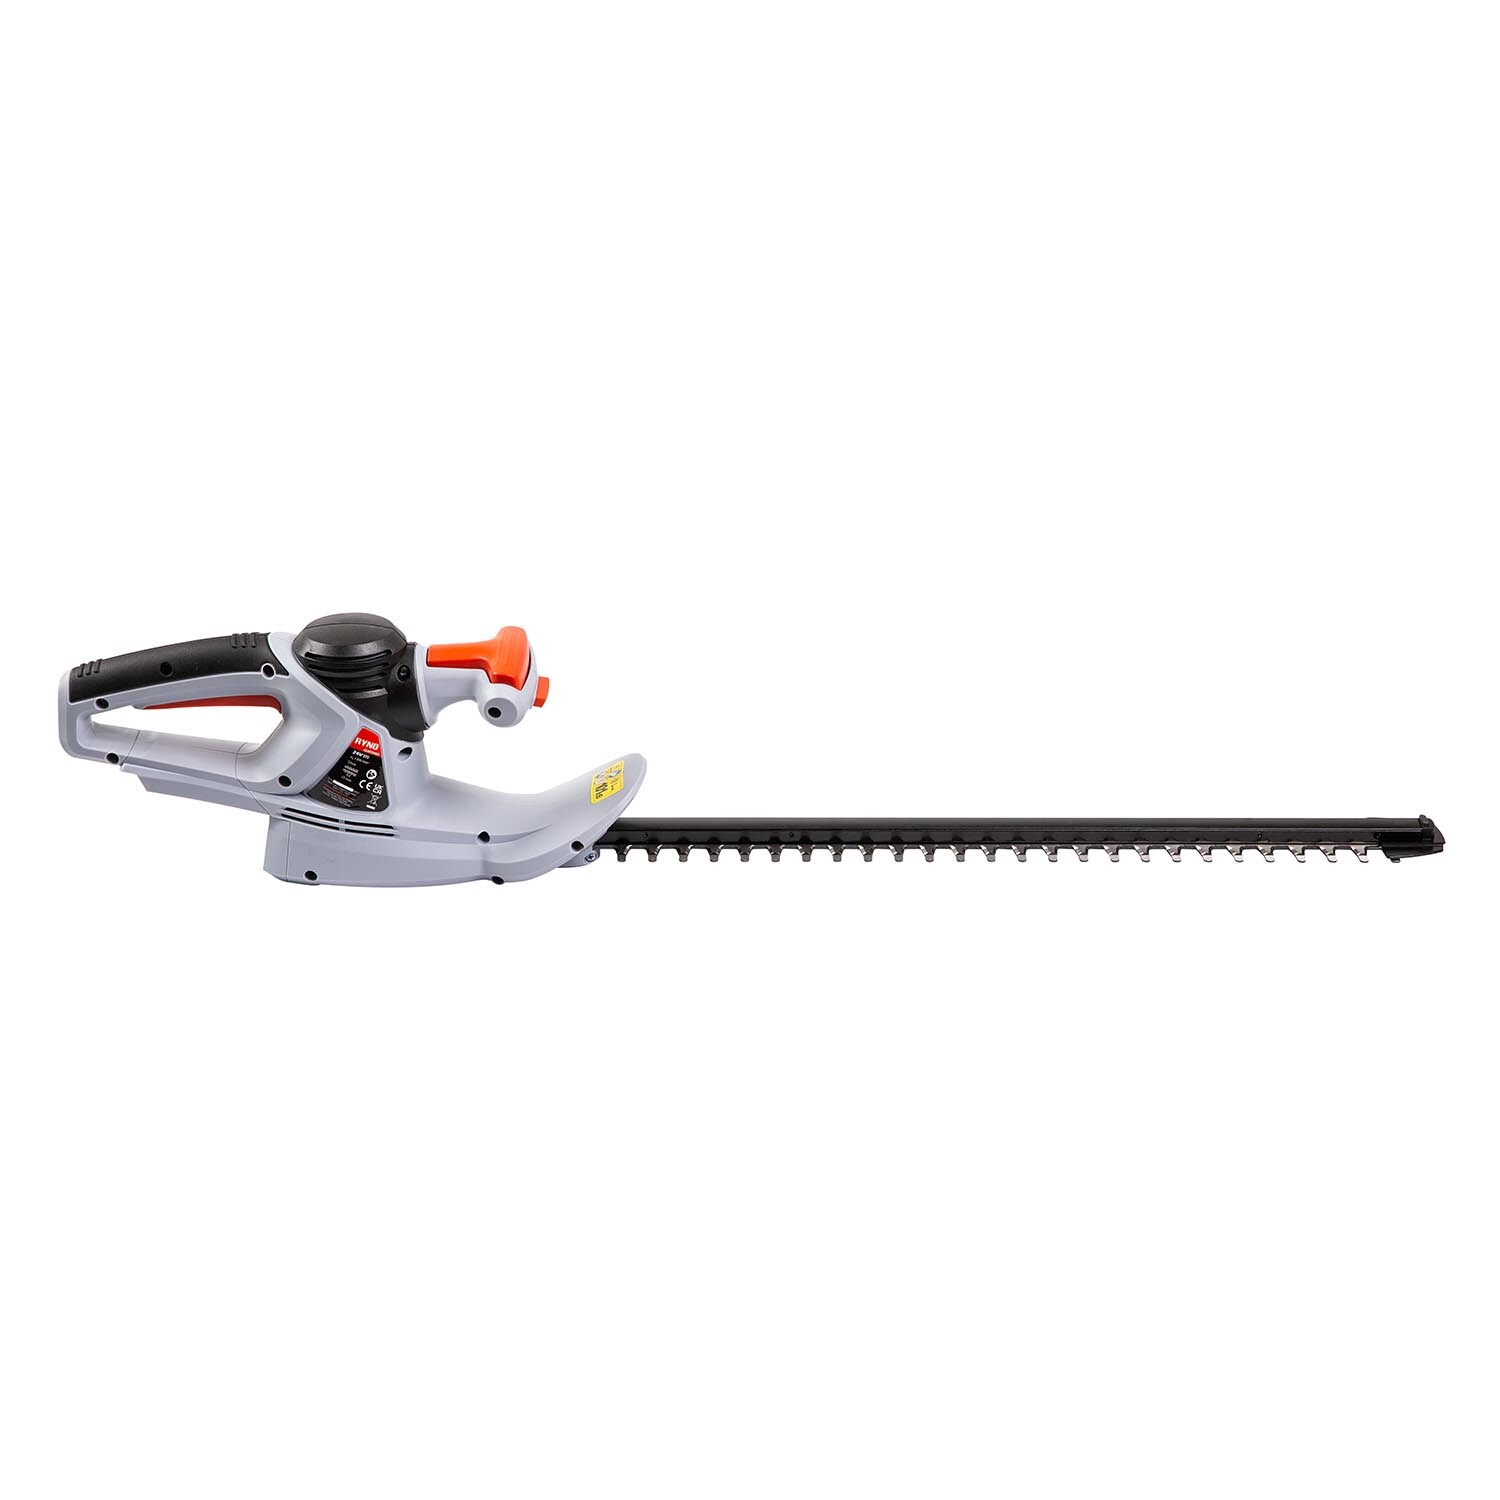 Cordless Hedge Trimmer - Grey Image